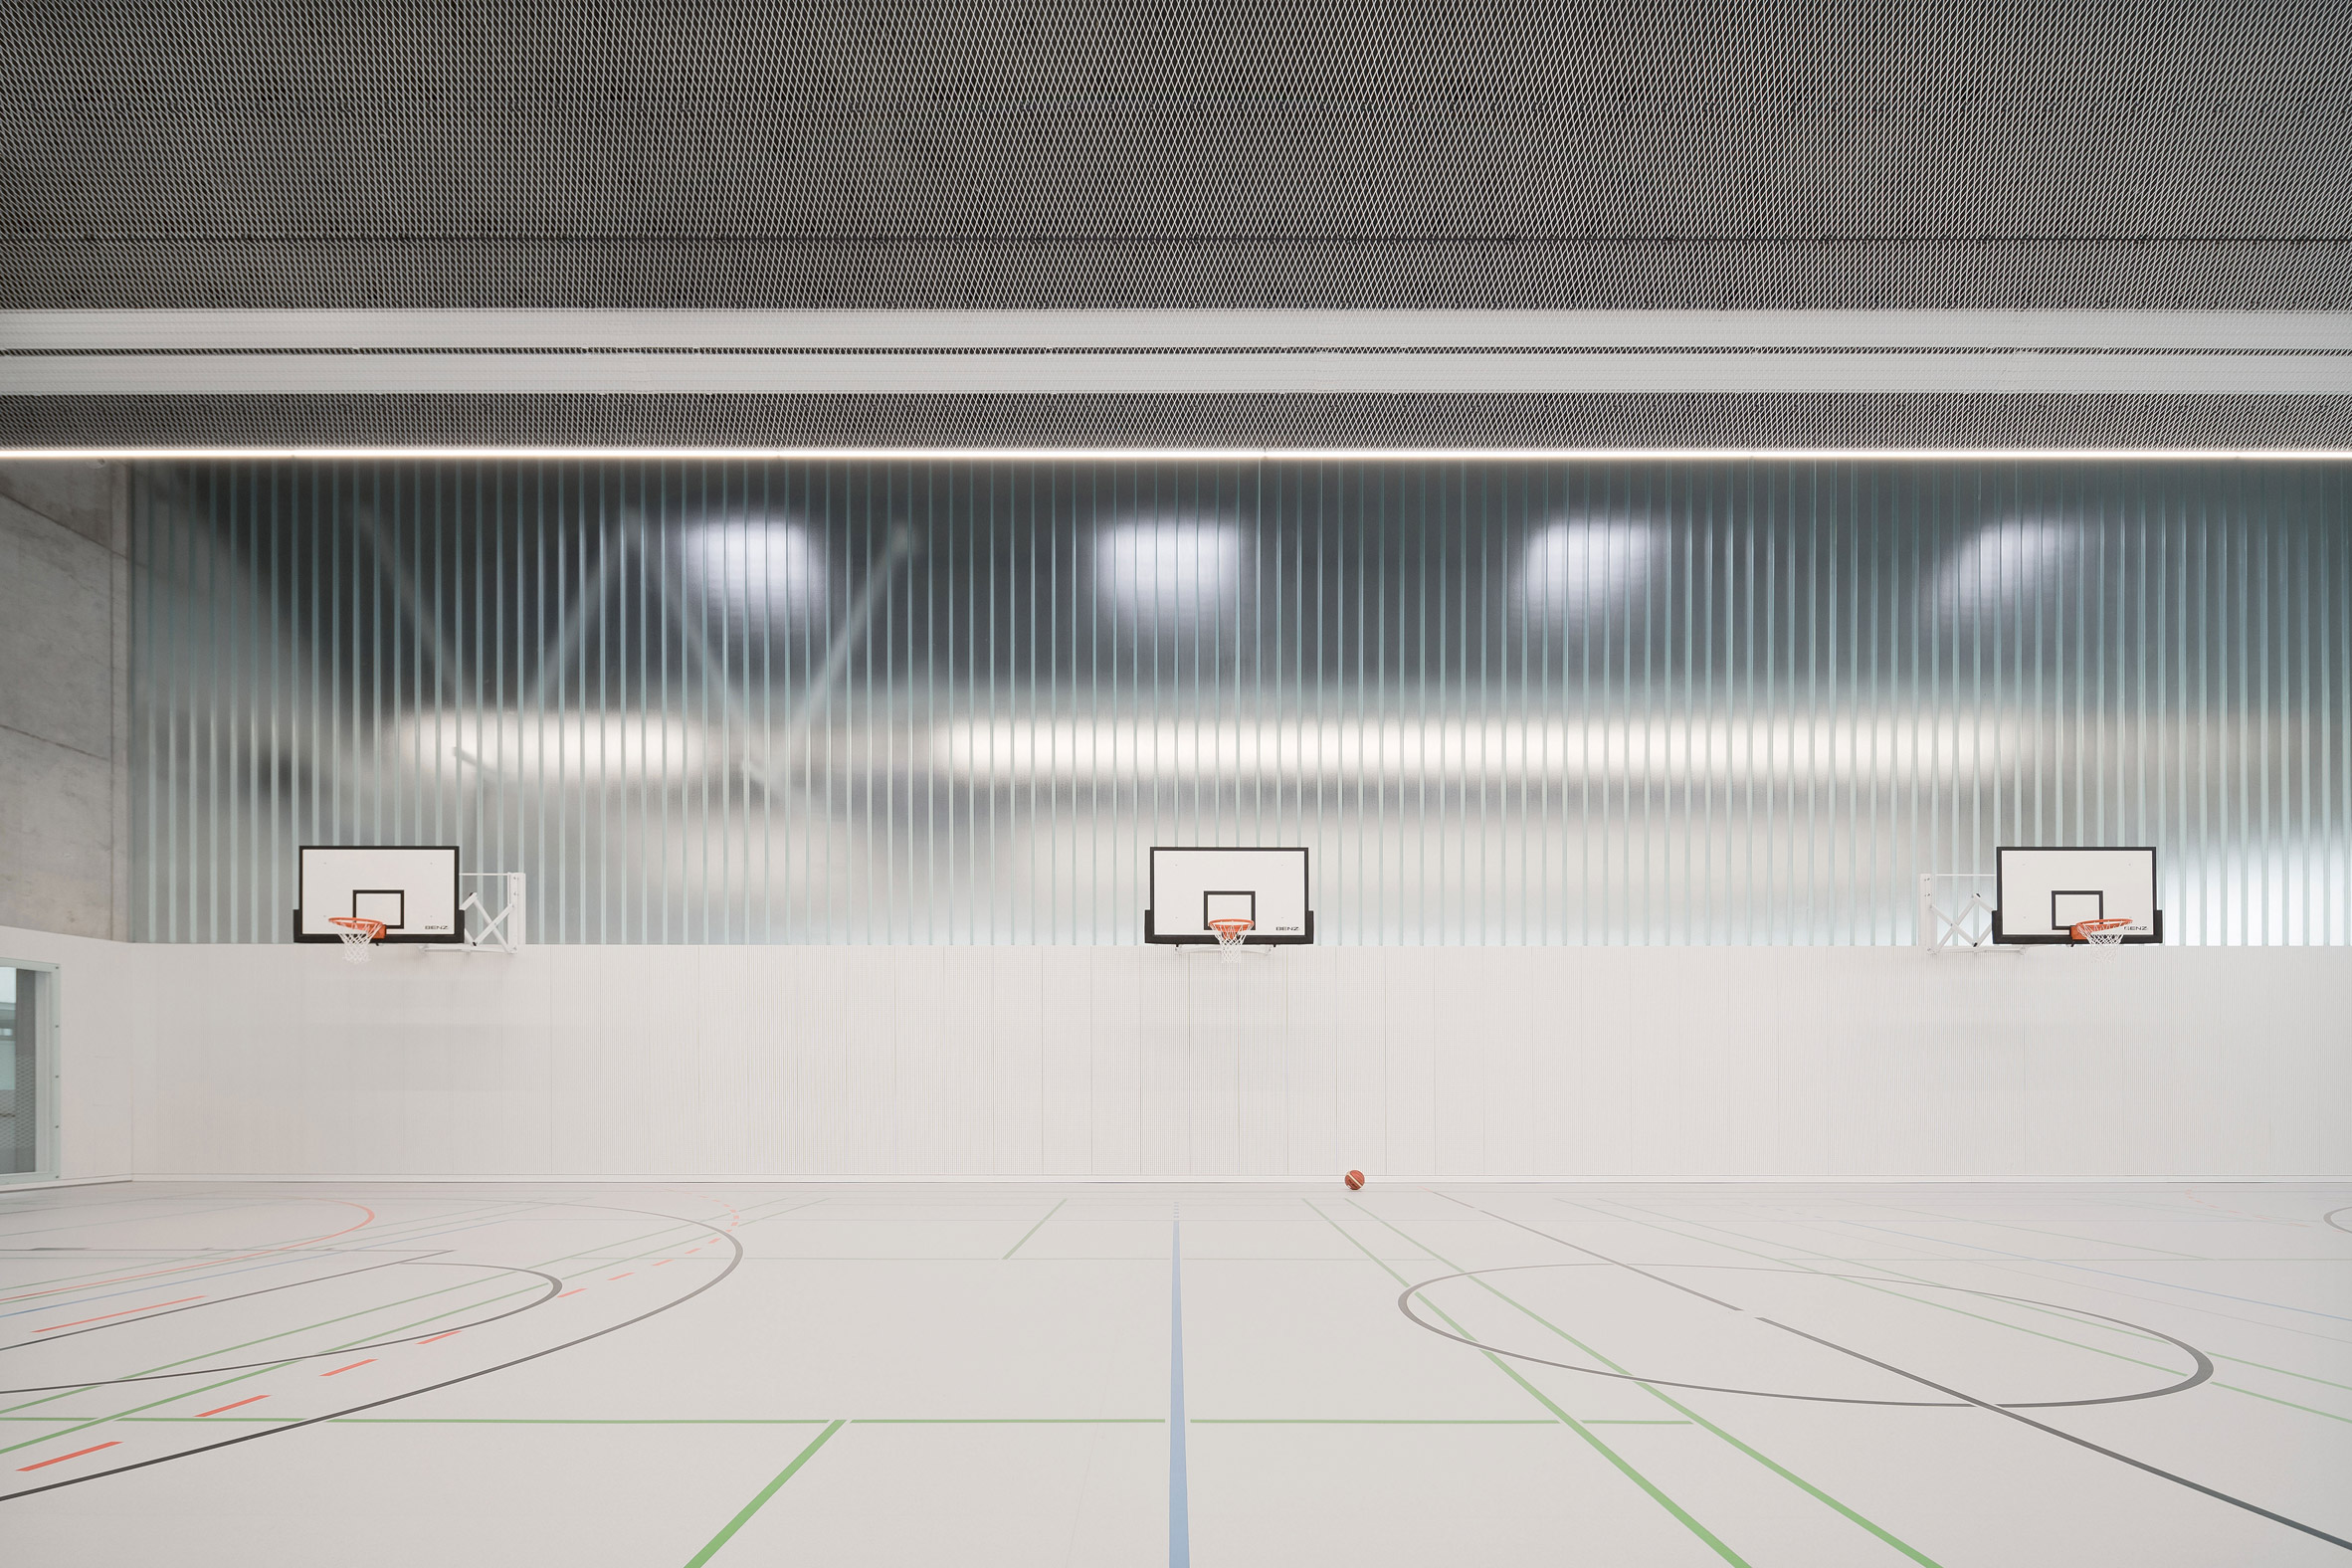 Basketball hoops are organised against a partially glazed wall